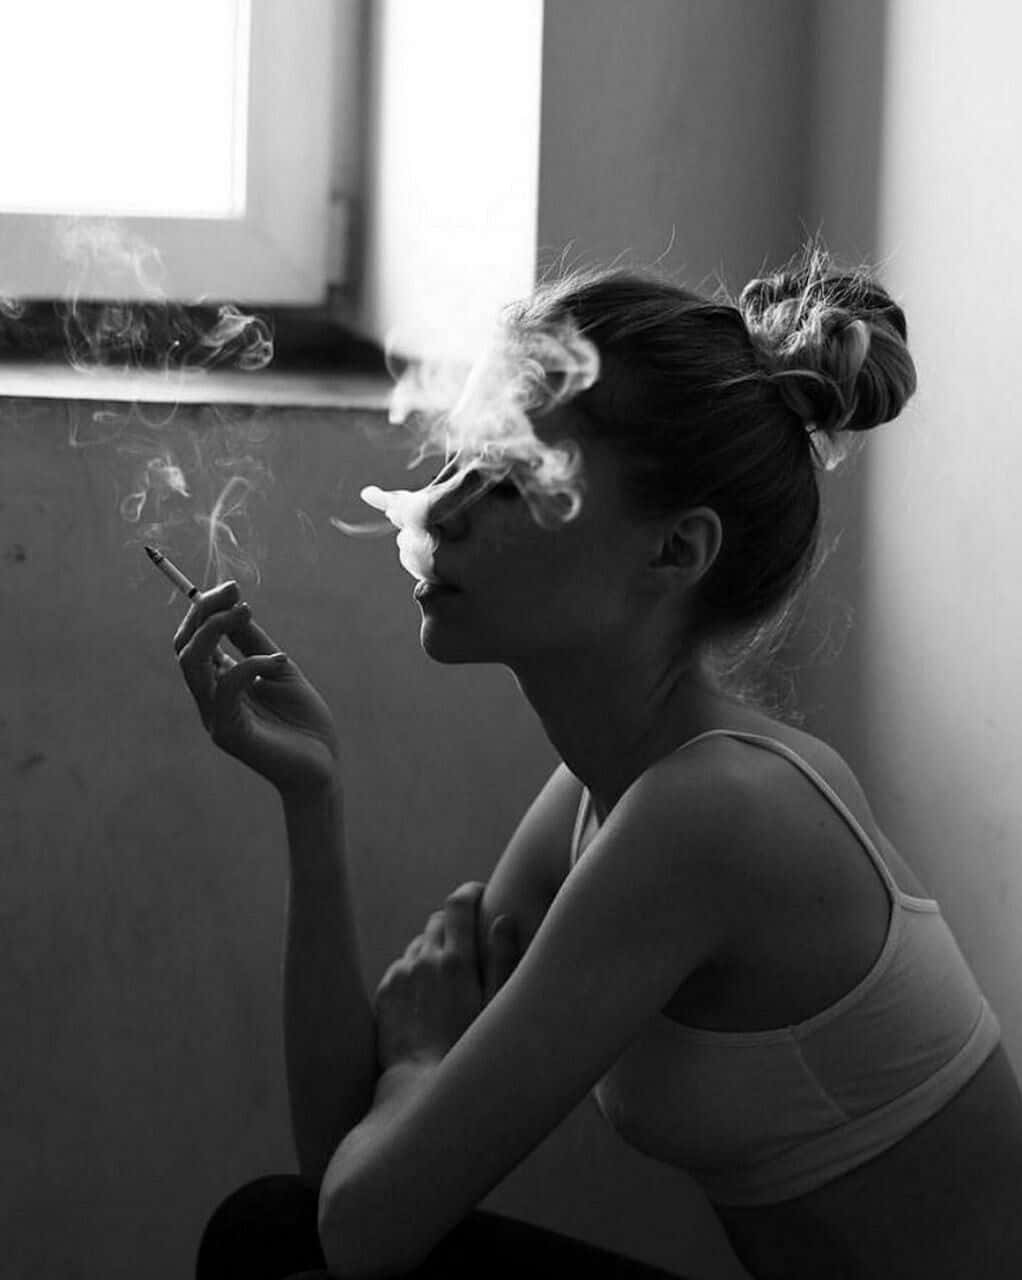 Download Smoking Pictures | Wallpapers.com